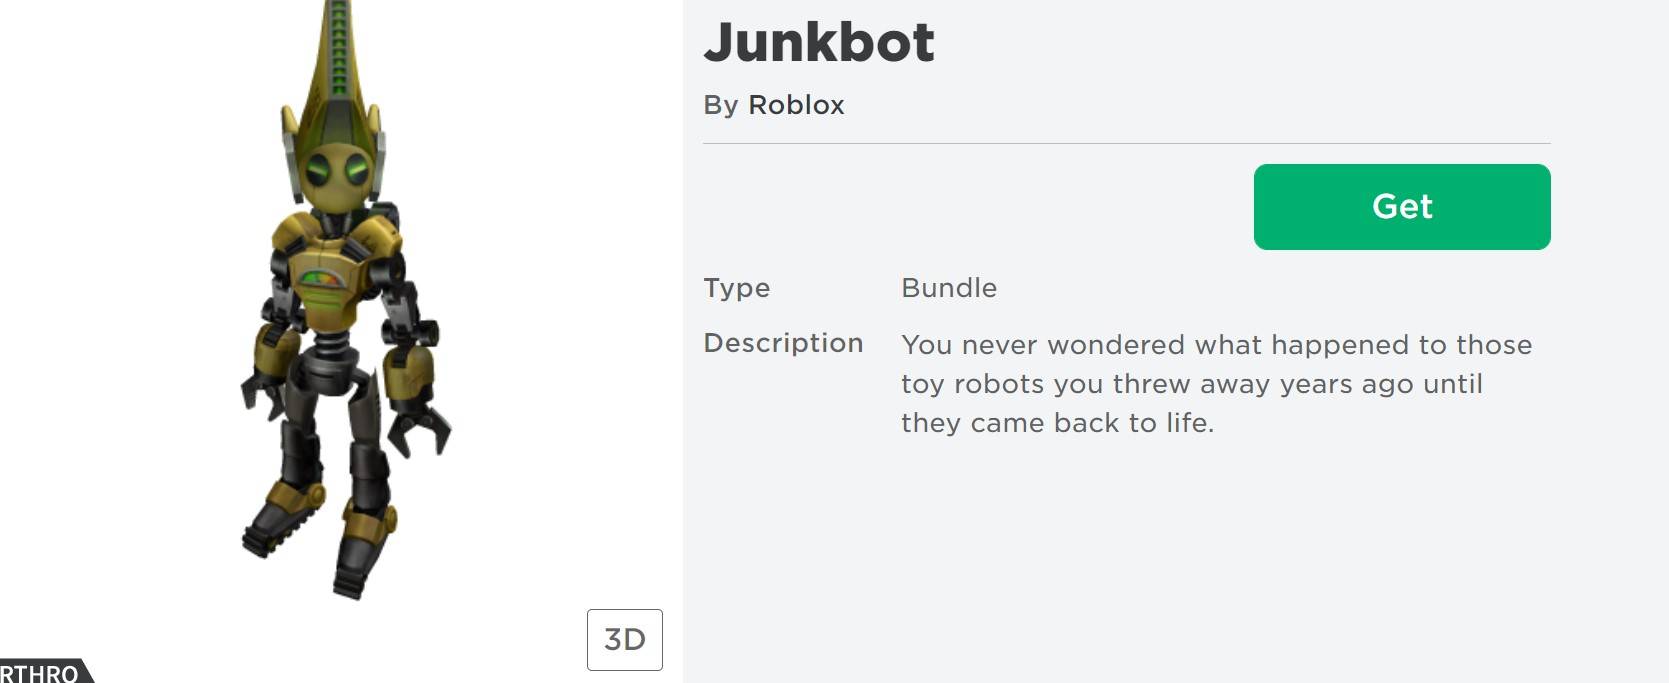 Roblox Promo Codes For Free Items In June 2021 - get free catalog items roblox